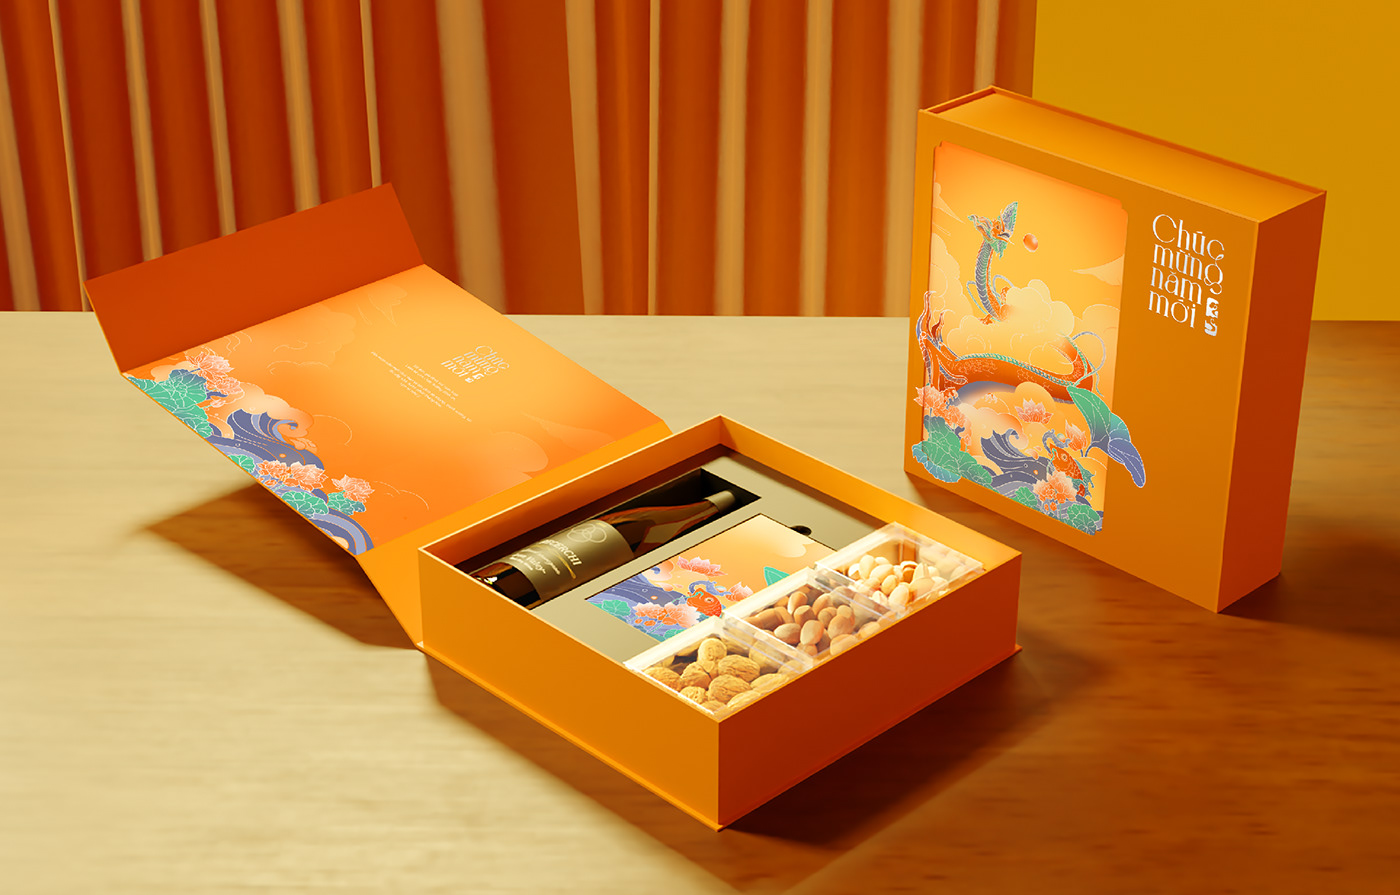 packaging design vietnam graphic design  Tet Holiday gift box Packaging 3D ILLUSTRATION  CachephoaRong IndayCreative